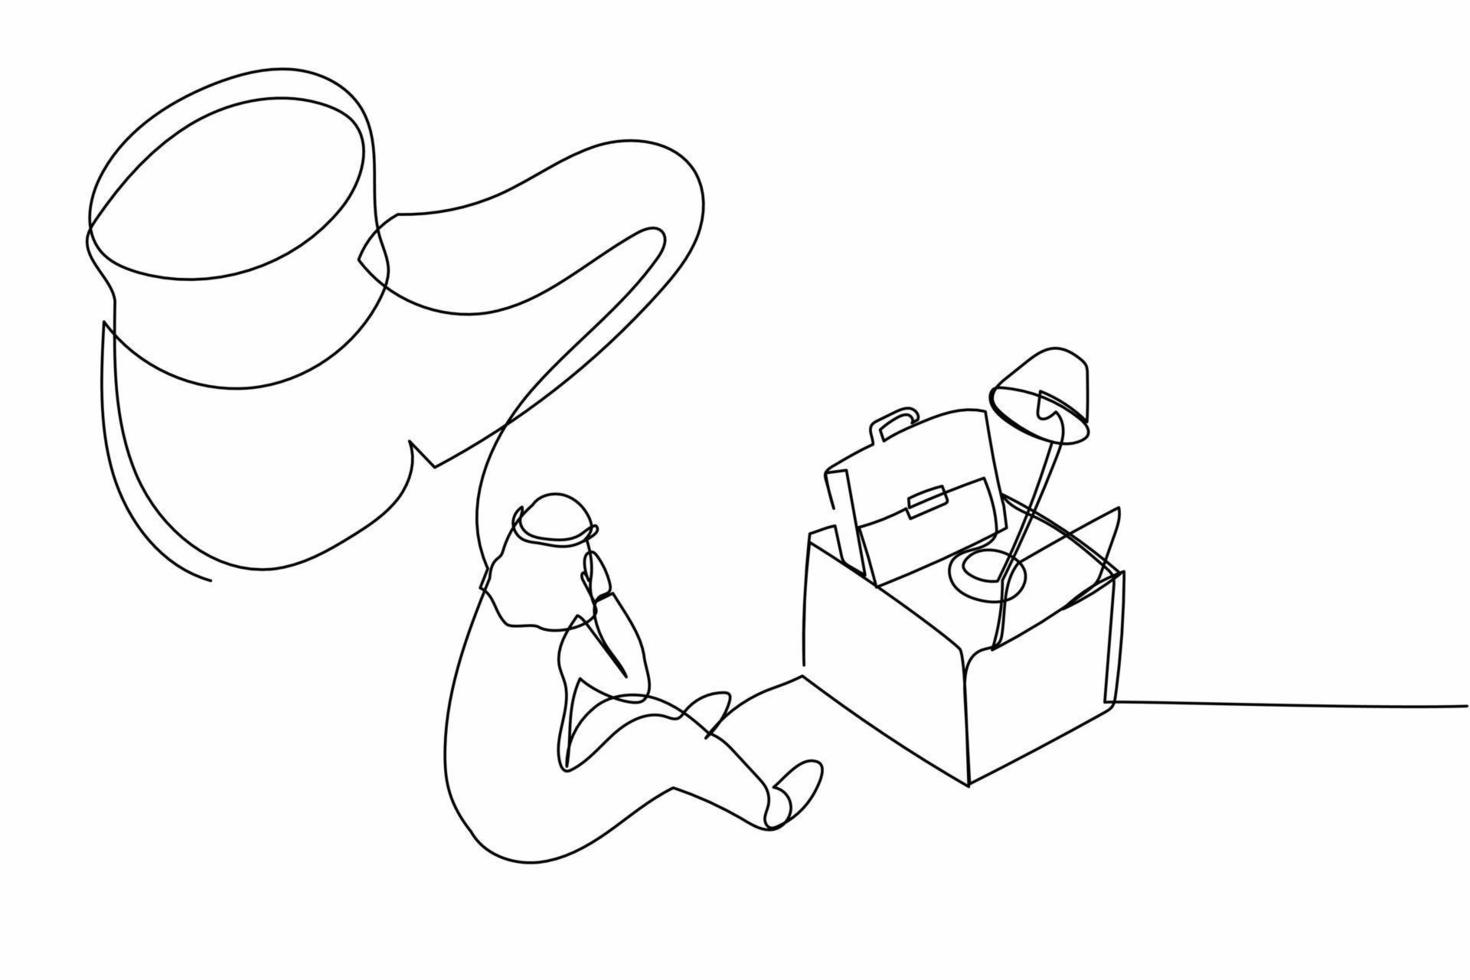 Continuous one line drawing stressed Arabian businessman sitting on the floor near office supplies under big foot stomp. Unemployment, dismissal person. Single line design vector graphic illustration